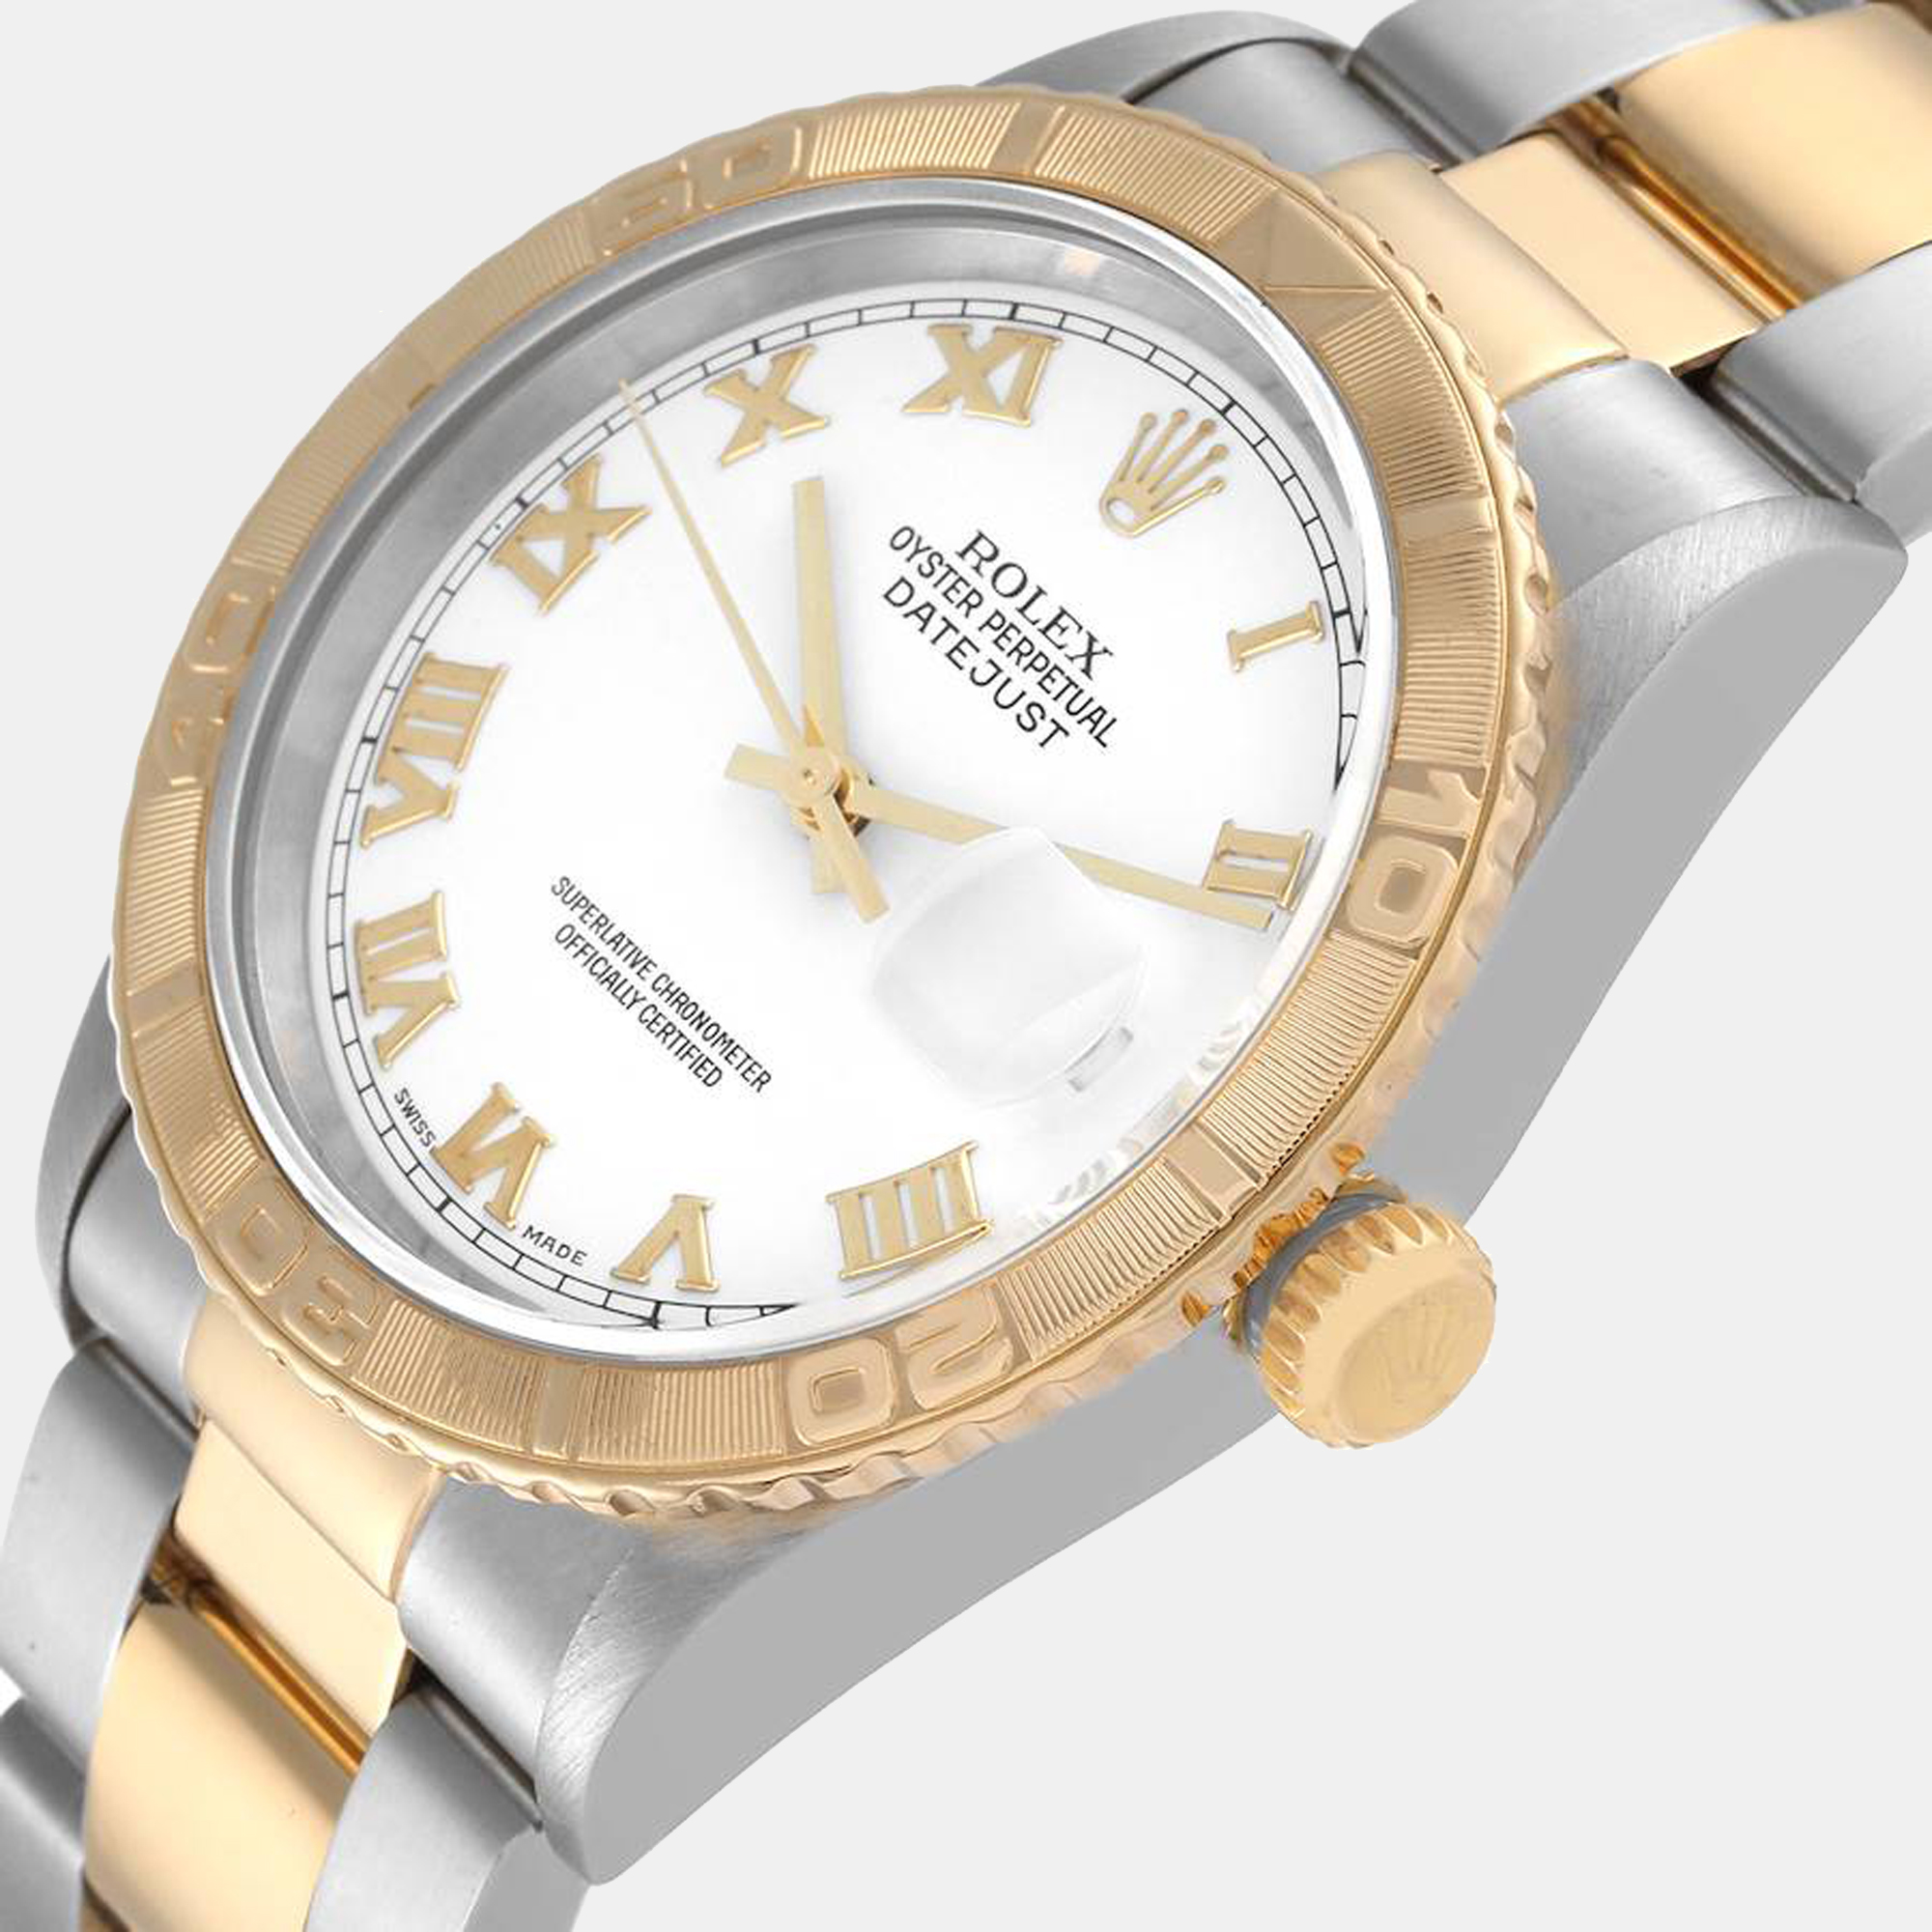 

Rolex White 18K Yellow Gold And Stainless Steel Datejust Turnograph 16263 Men's Wristwatch 36 mm